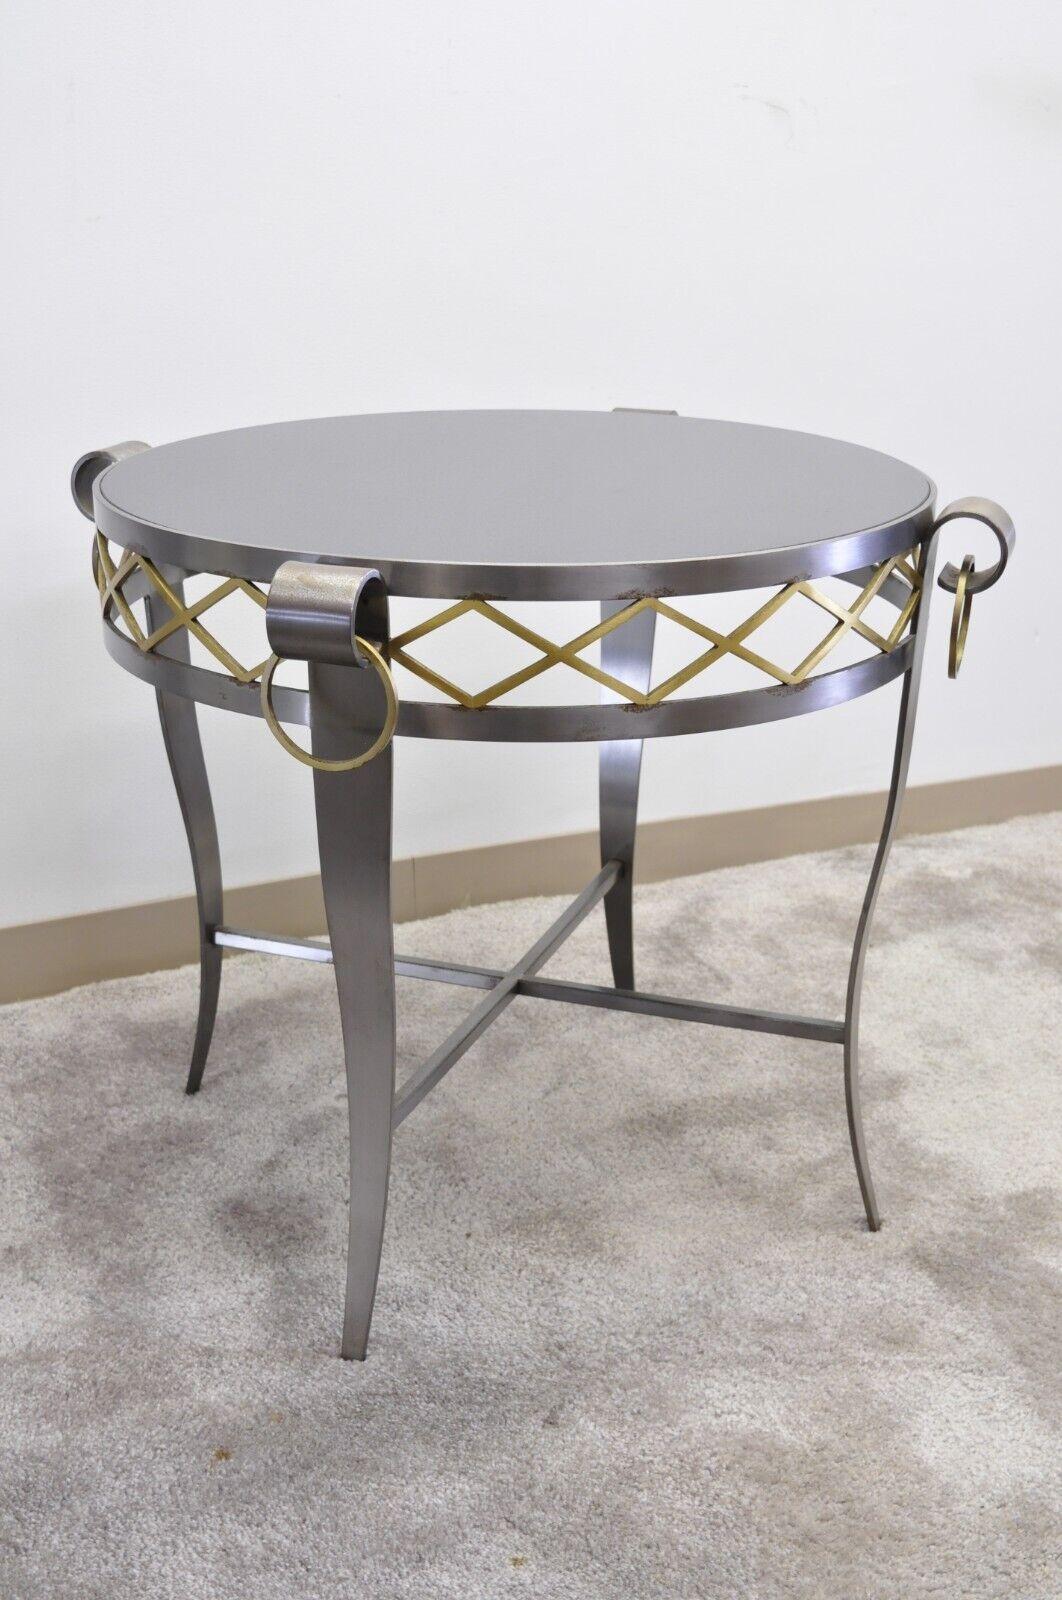 Neoclassical Maison Jansen Style Steel & Black Marble Round Bouillotte Center Table. Item features a heavy steel frame, inset black round marble top, brass x-form detail to skirt, and 4 brass rings, quality Italian craftmanship, great style and